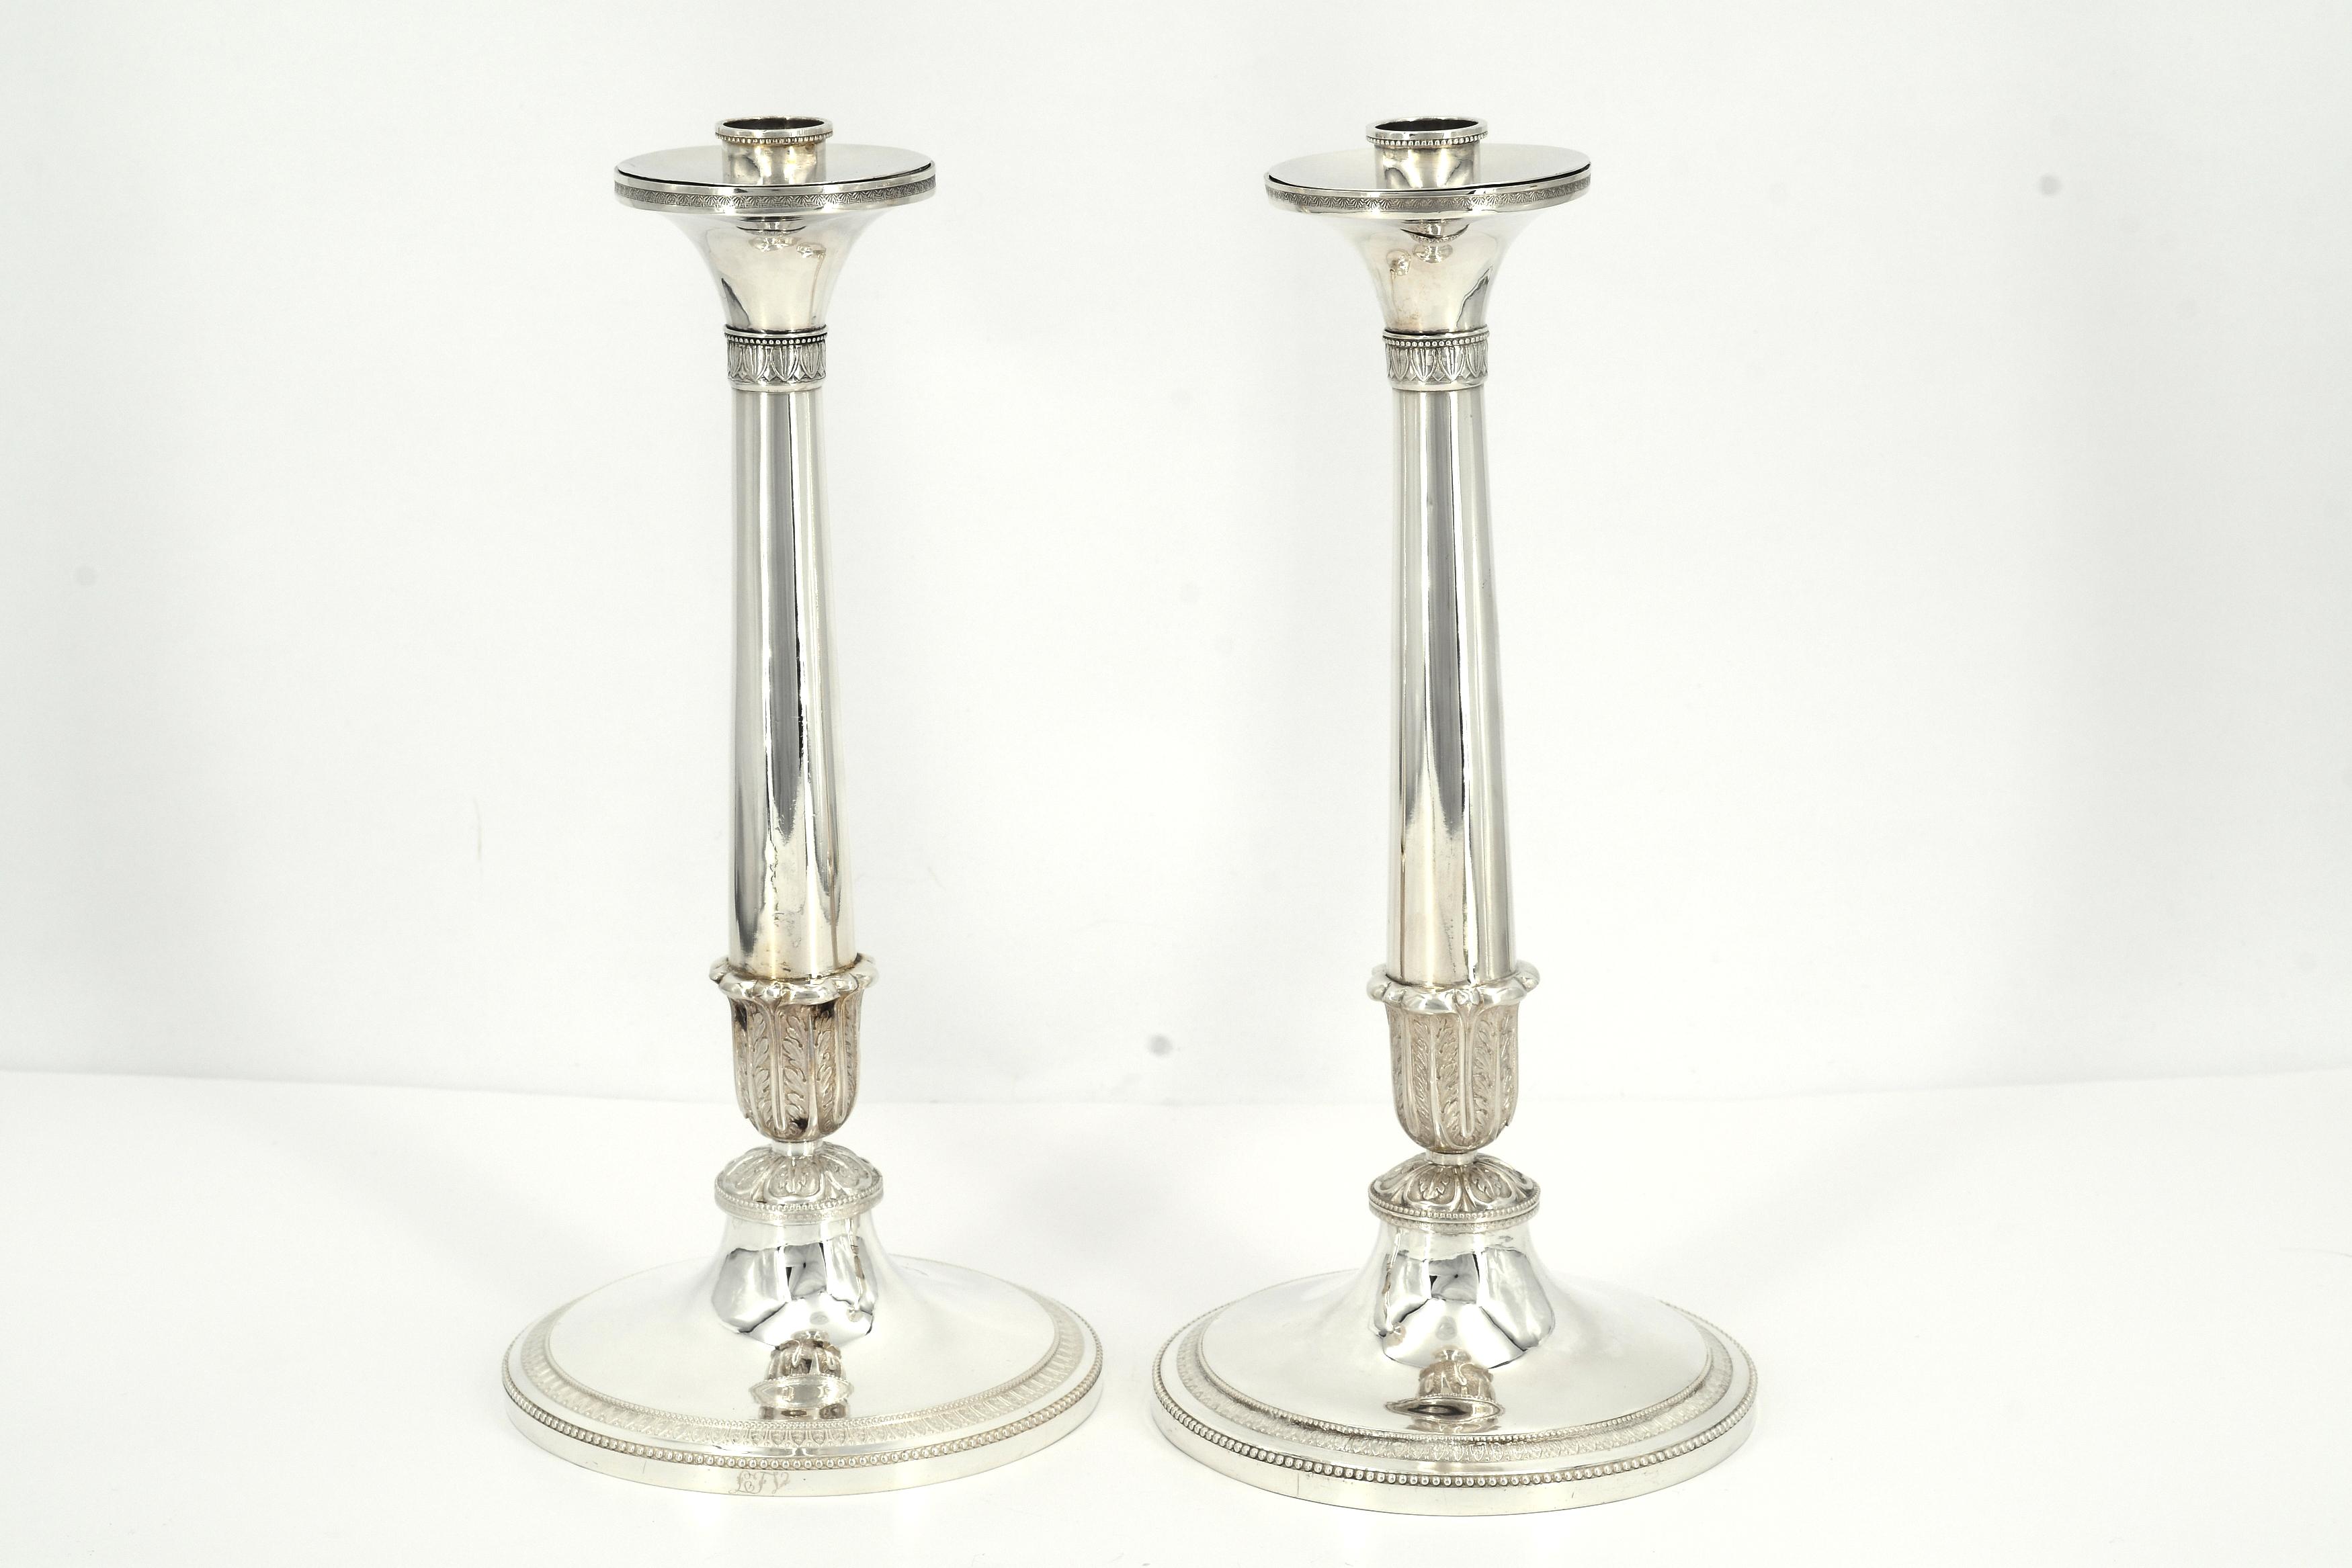 Pair of large silver candlesticks with lancet leaf decor - Image 3 of 8